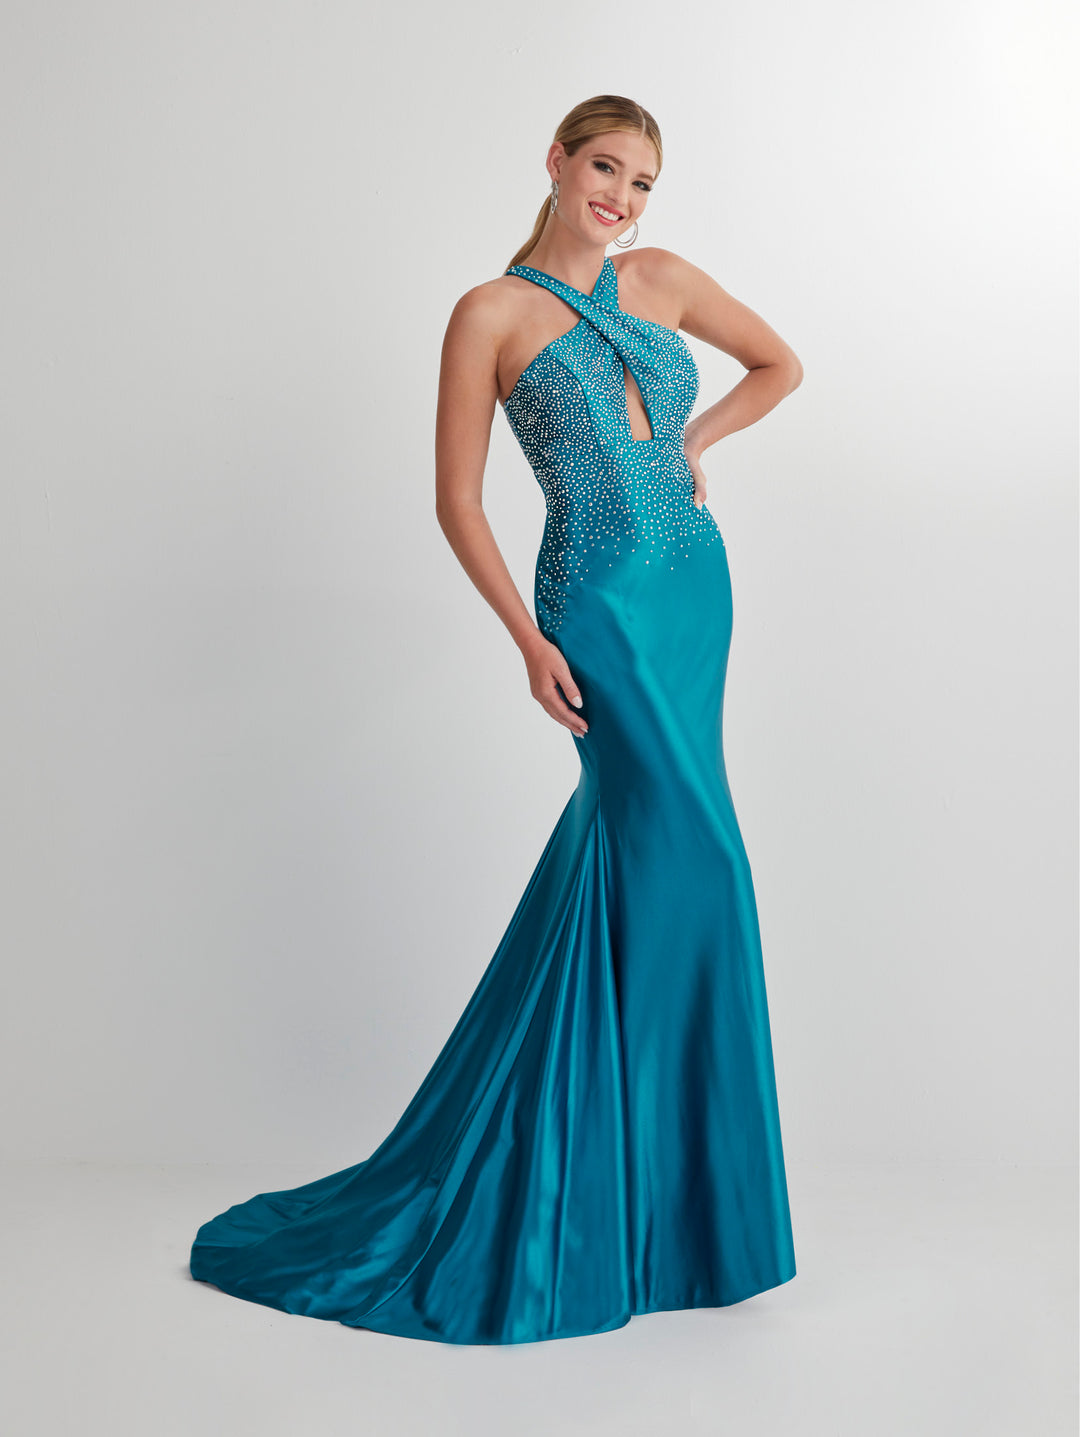 Beaded Spandex Halter Keyhole Gown by Studio 17 12894